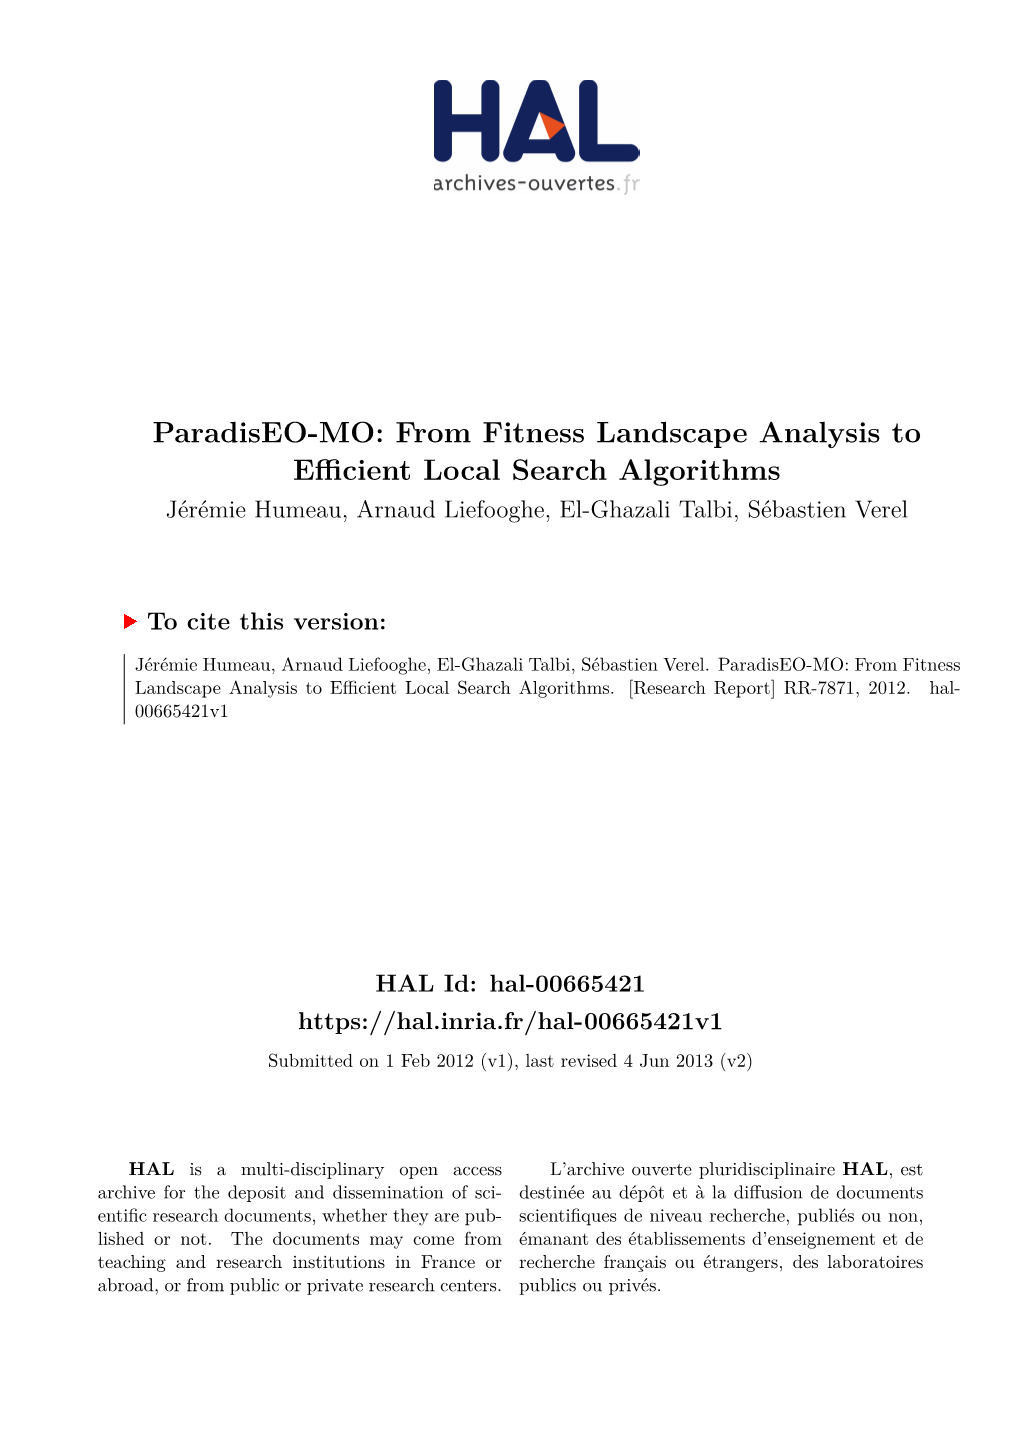 Paradiseo-MO: from Fitness Landscape Analysis to Efficient